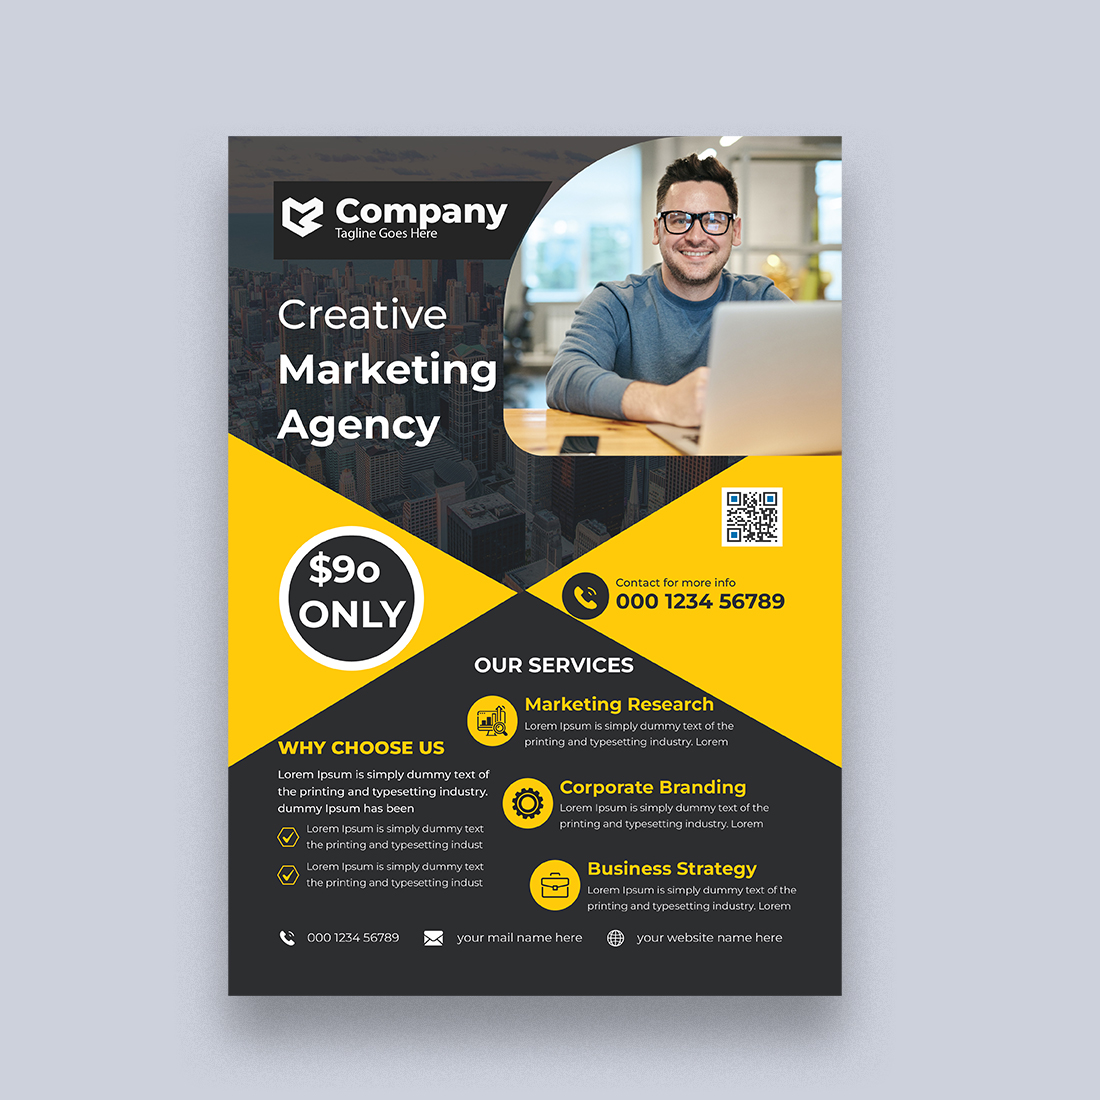 Professional Corporate Flyer Design Template cover image.